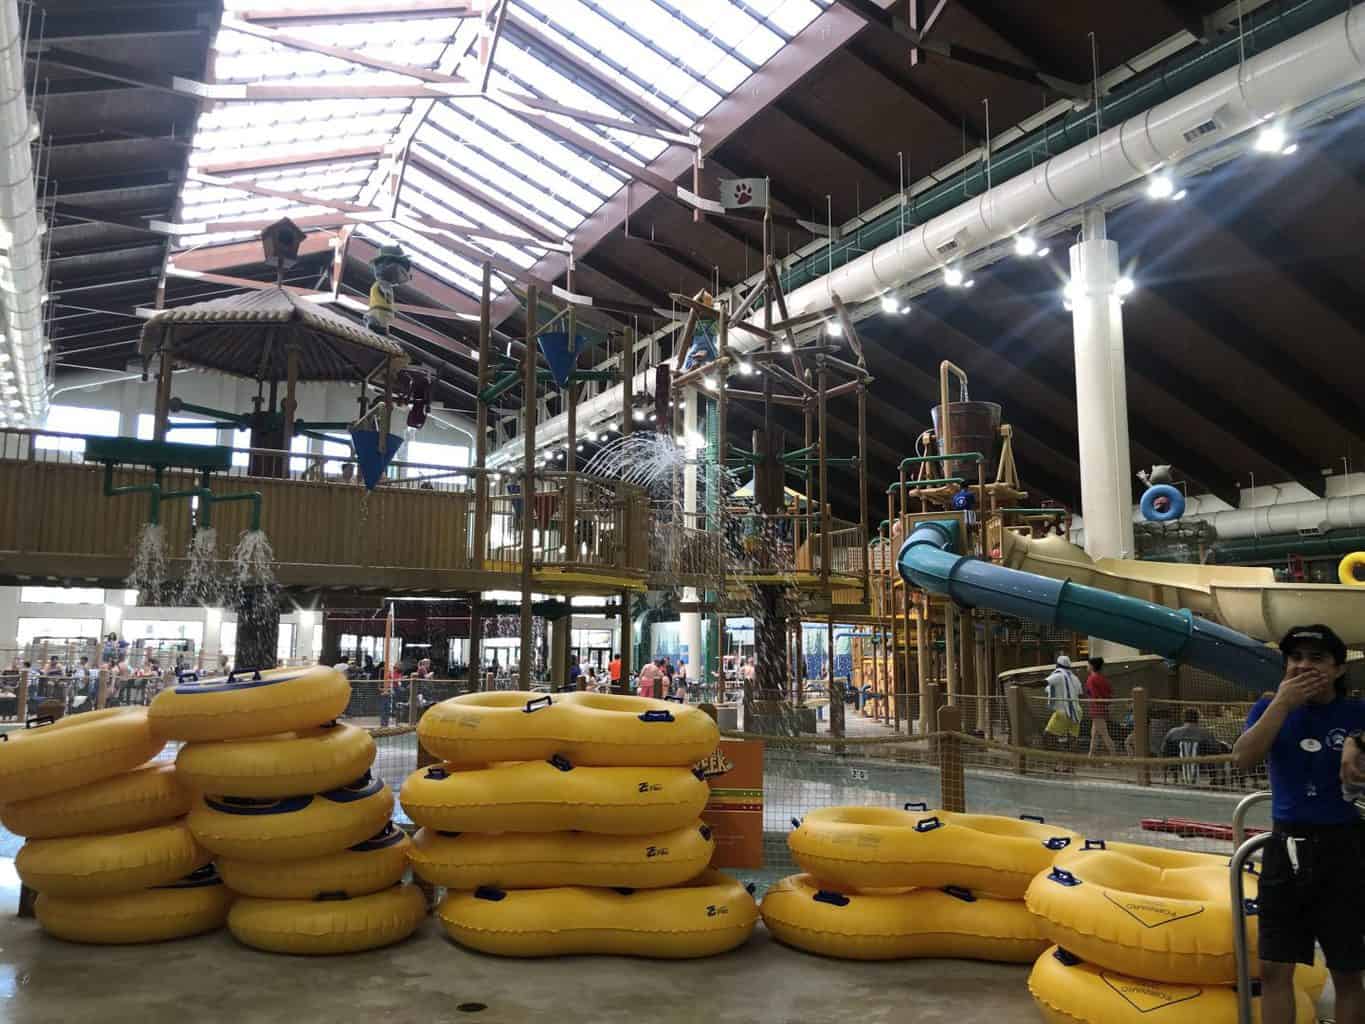 great wolf lodge water park